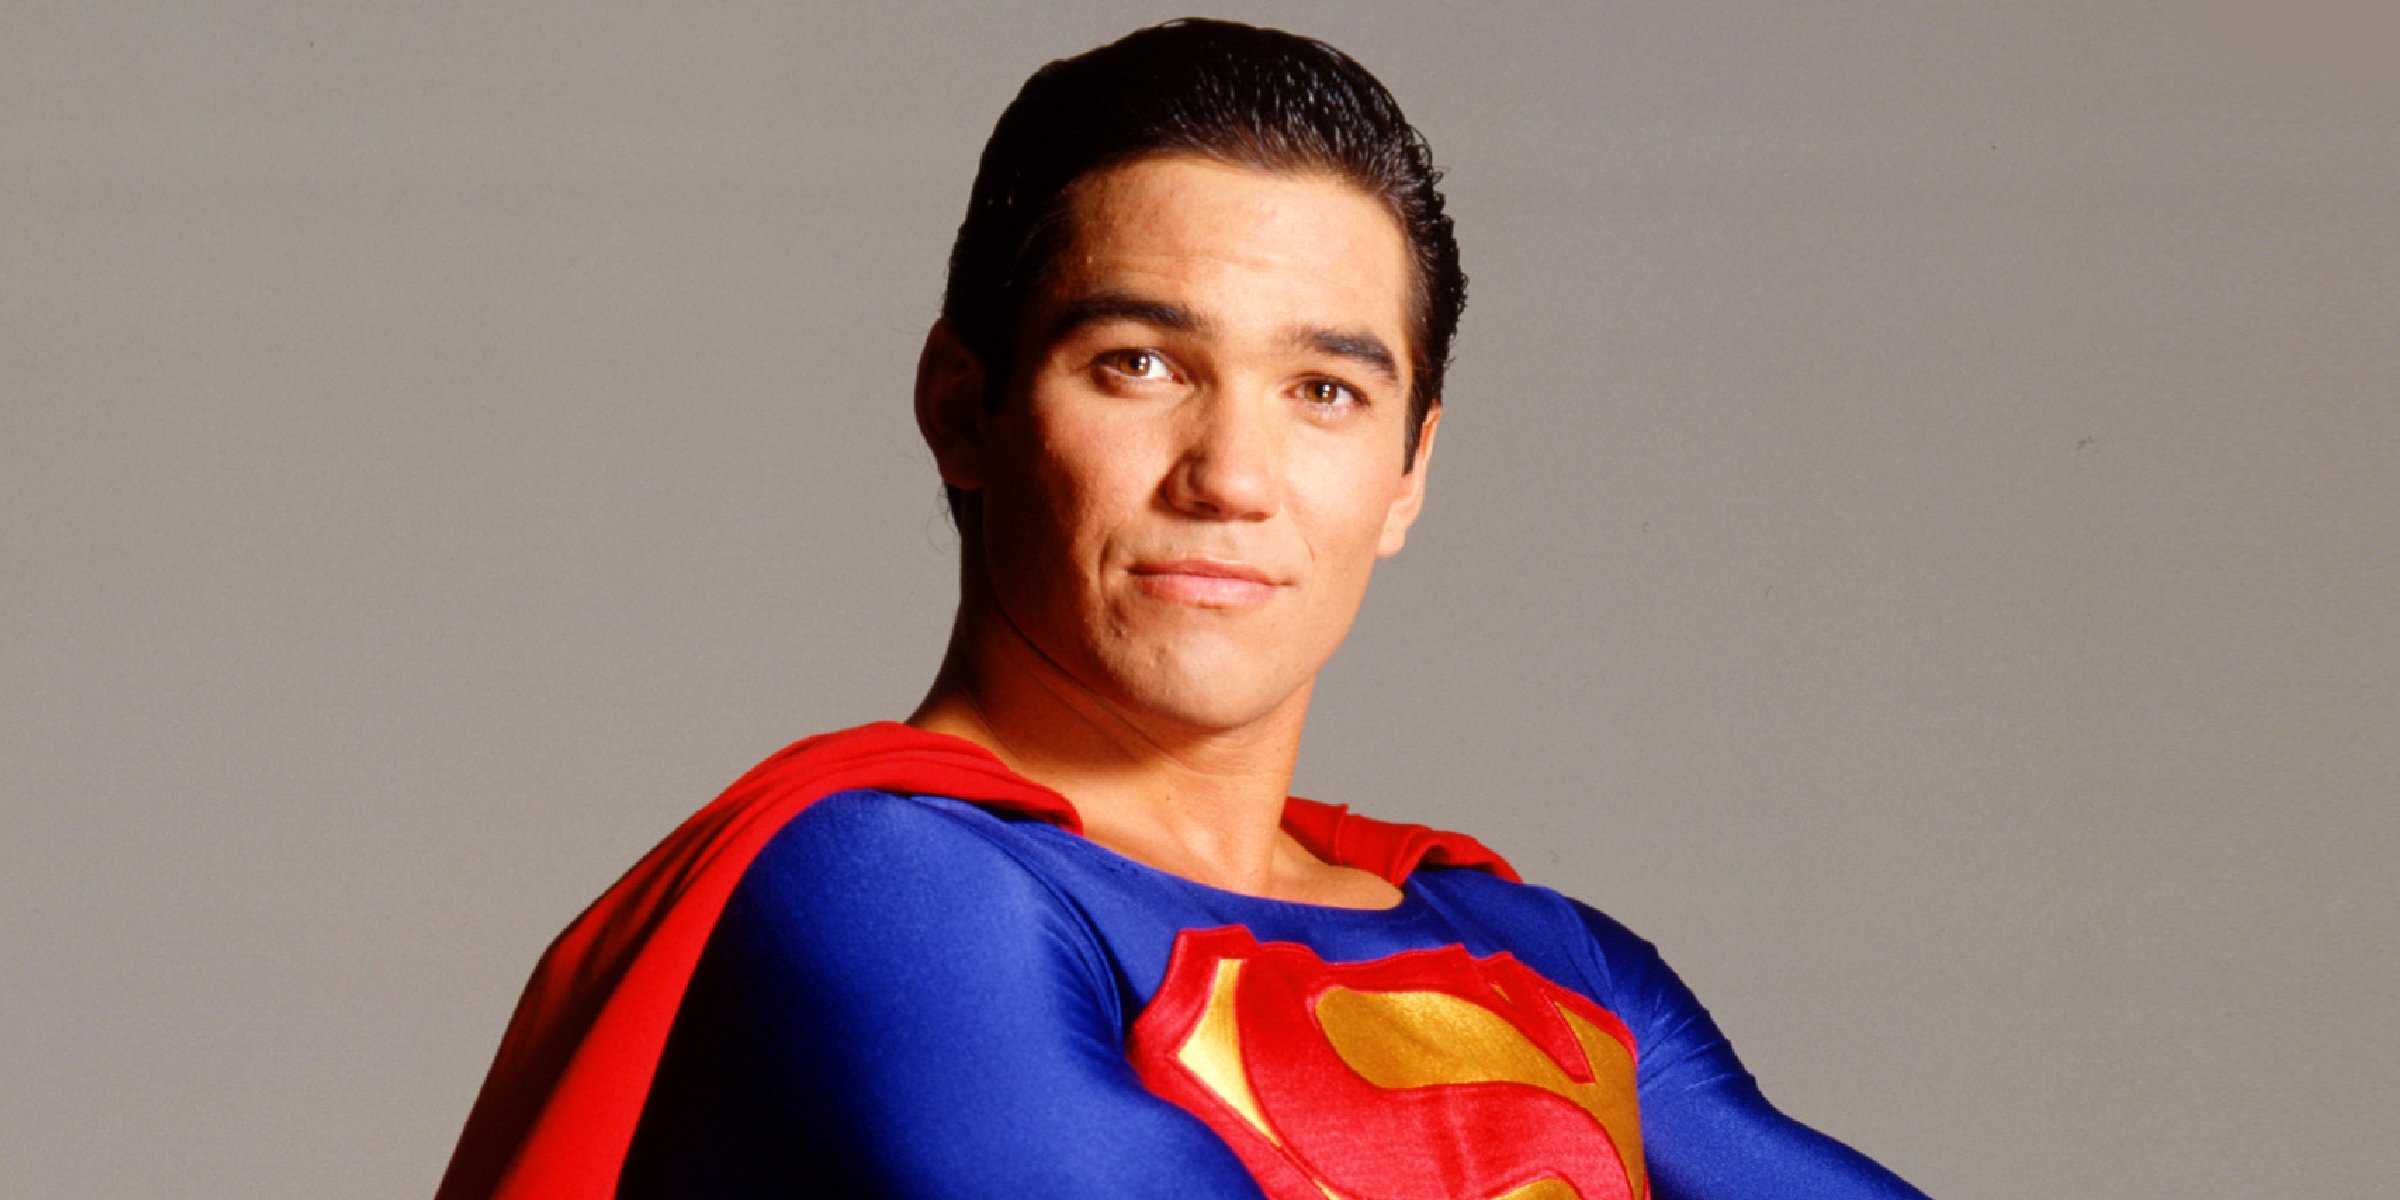 Dean Cain, 1995 | Source: Getty Images